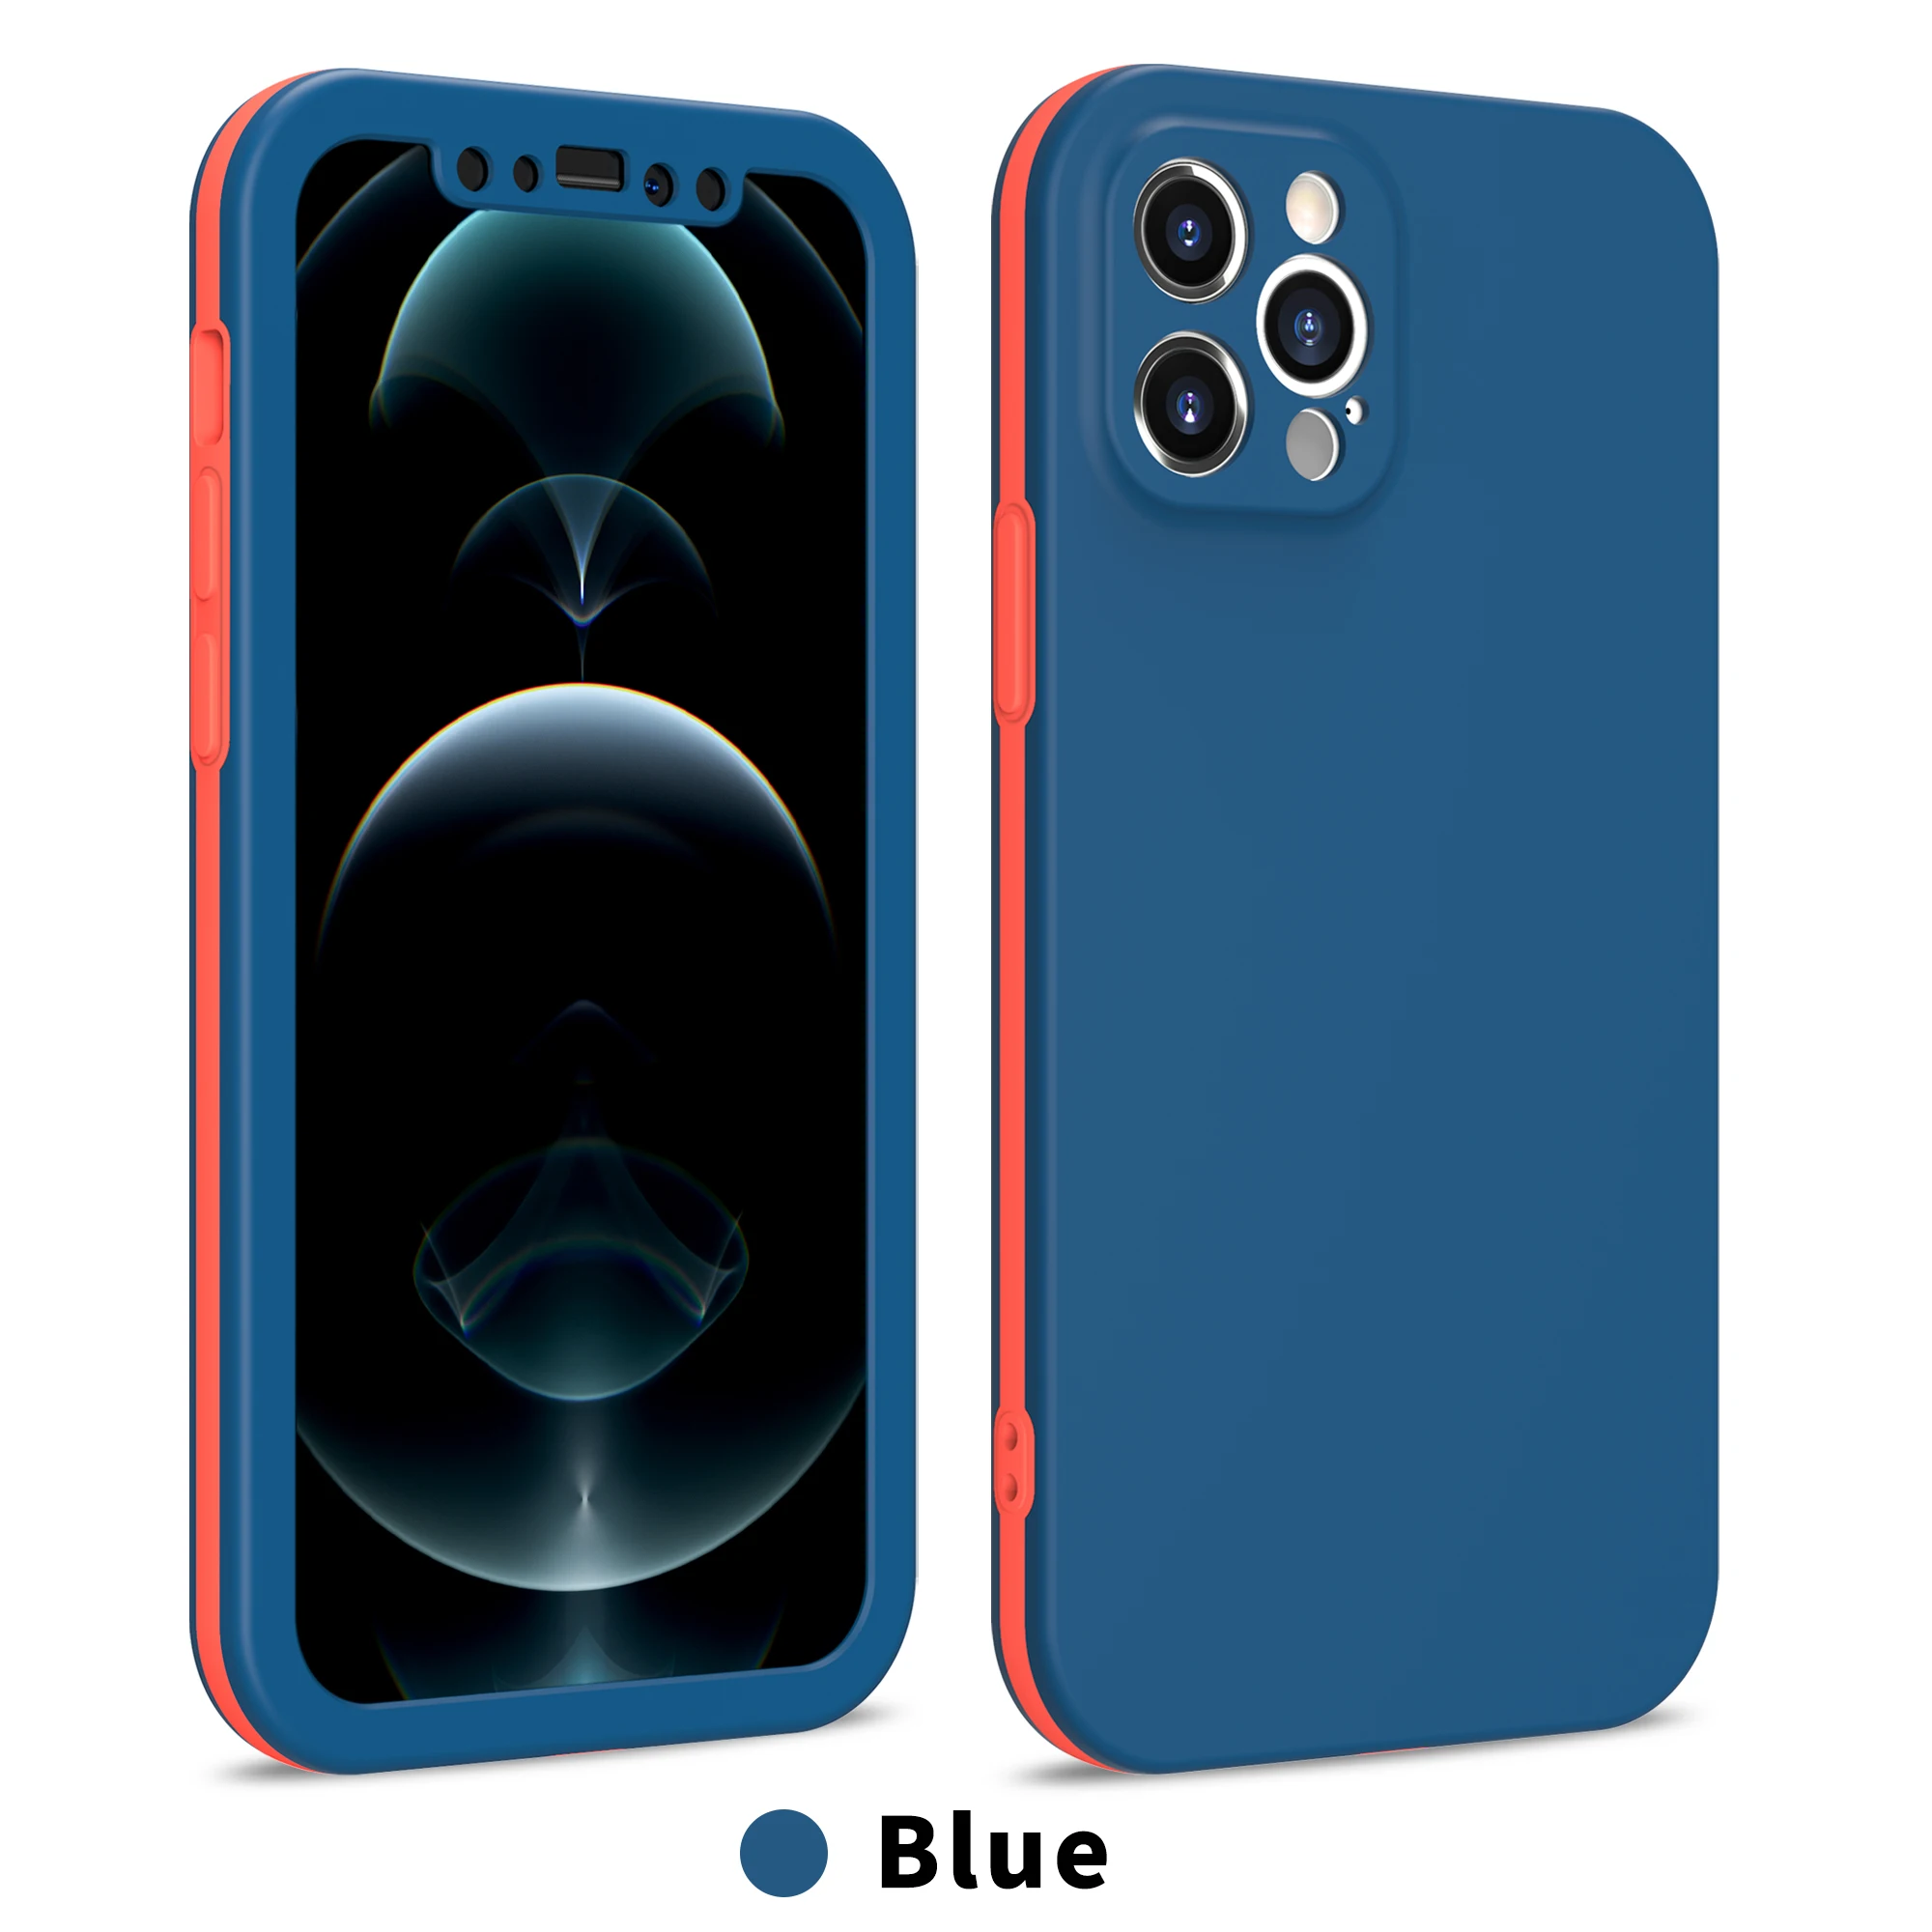 360 Full Cover Protective Phone Case For iPhone 13 12 Mini 11 Pro XS Max X XR 6 7 8 Plus SE 2020 Soft Silicone Shockproof Cover iphone xr clear case